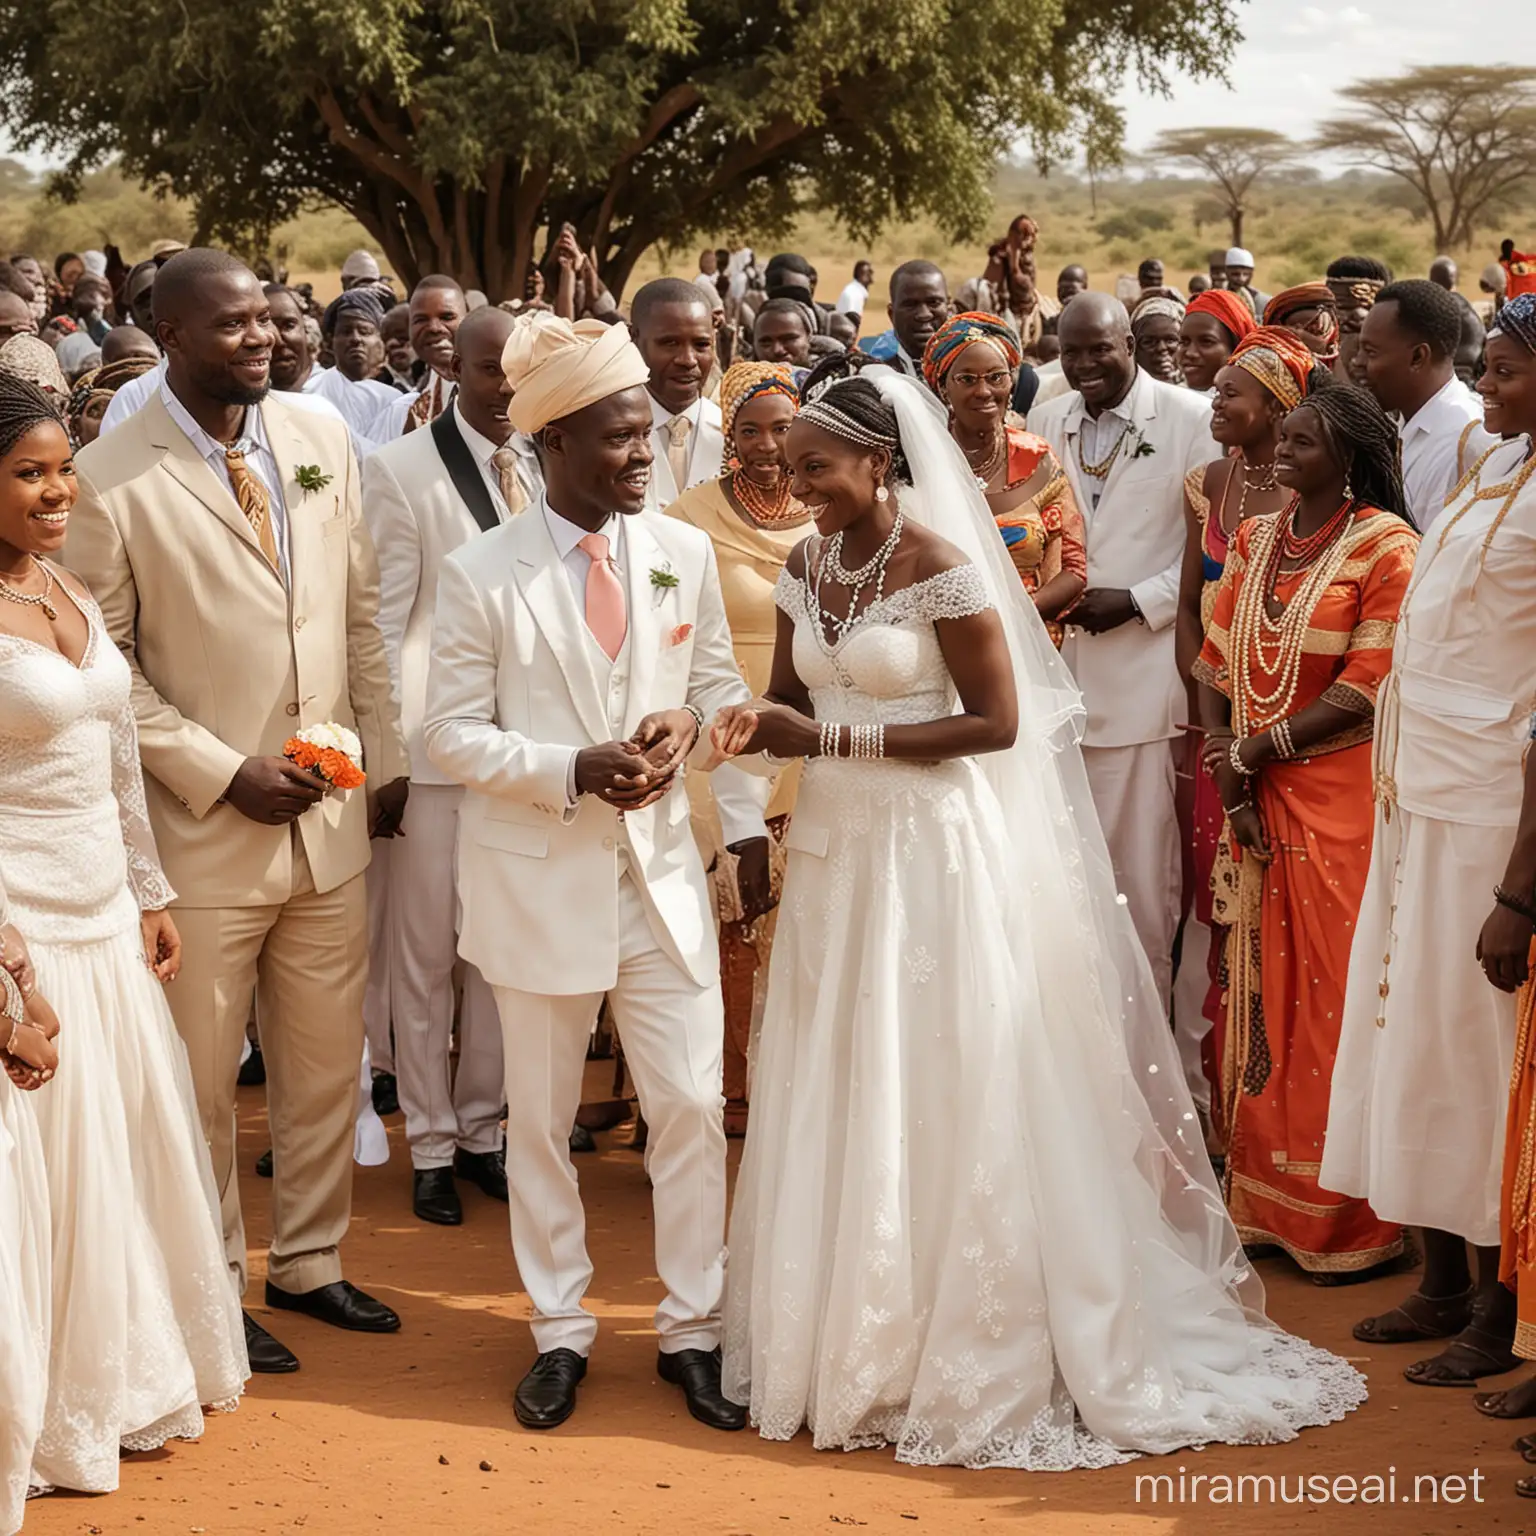 Marriage ceremony in Africa